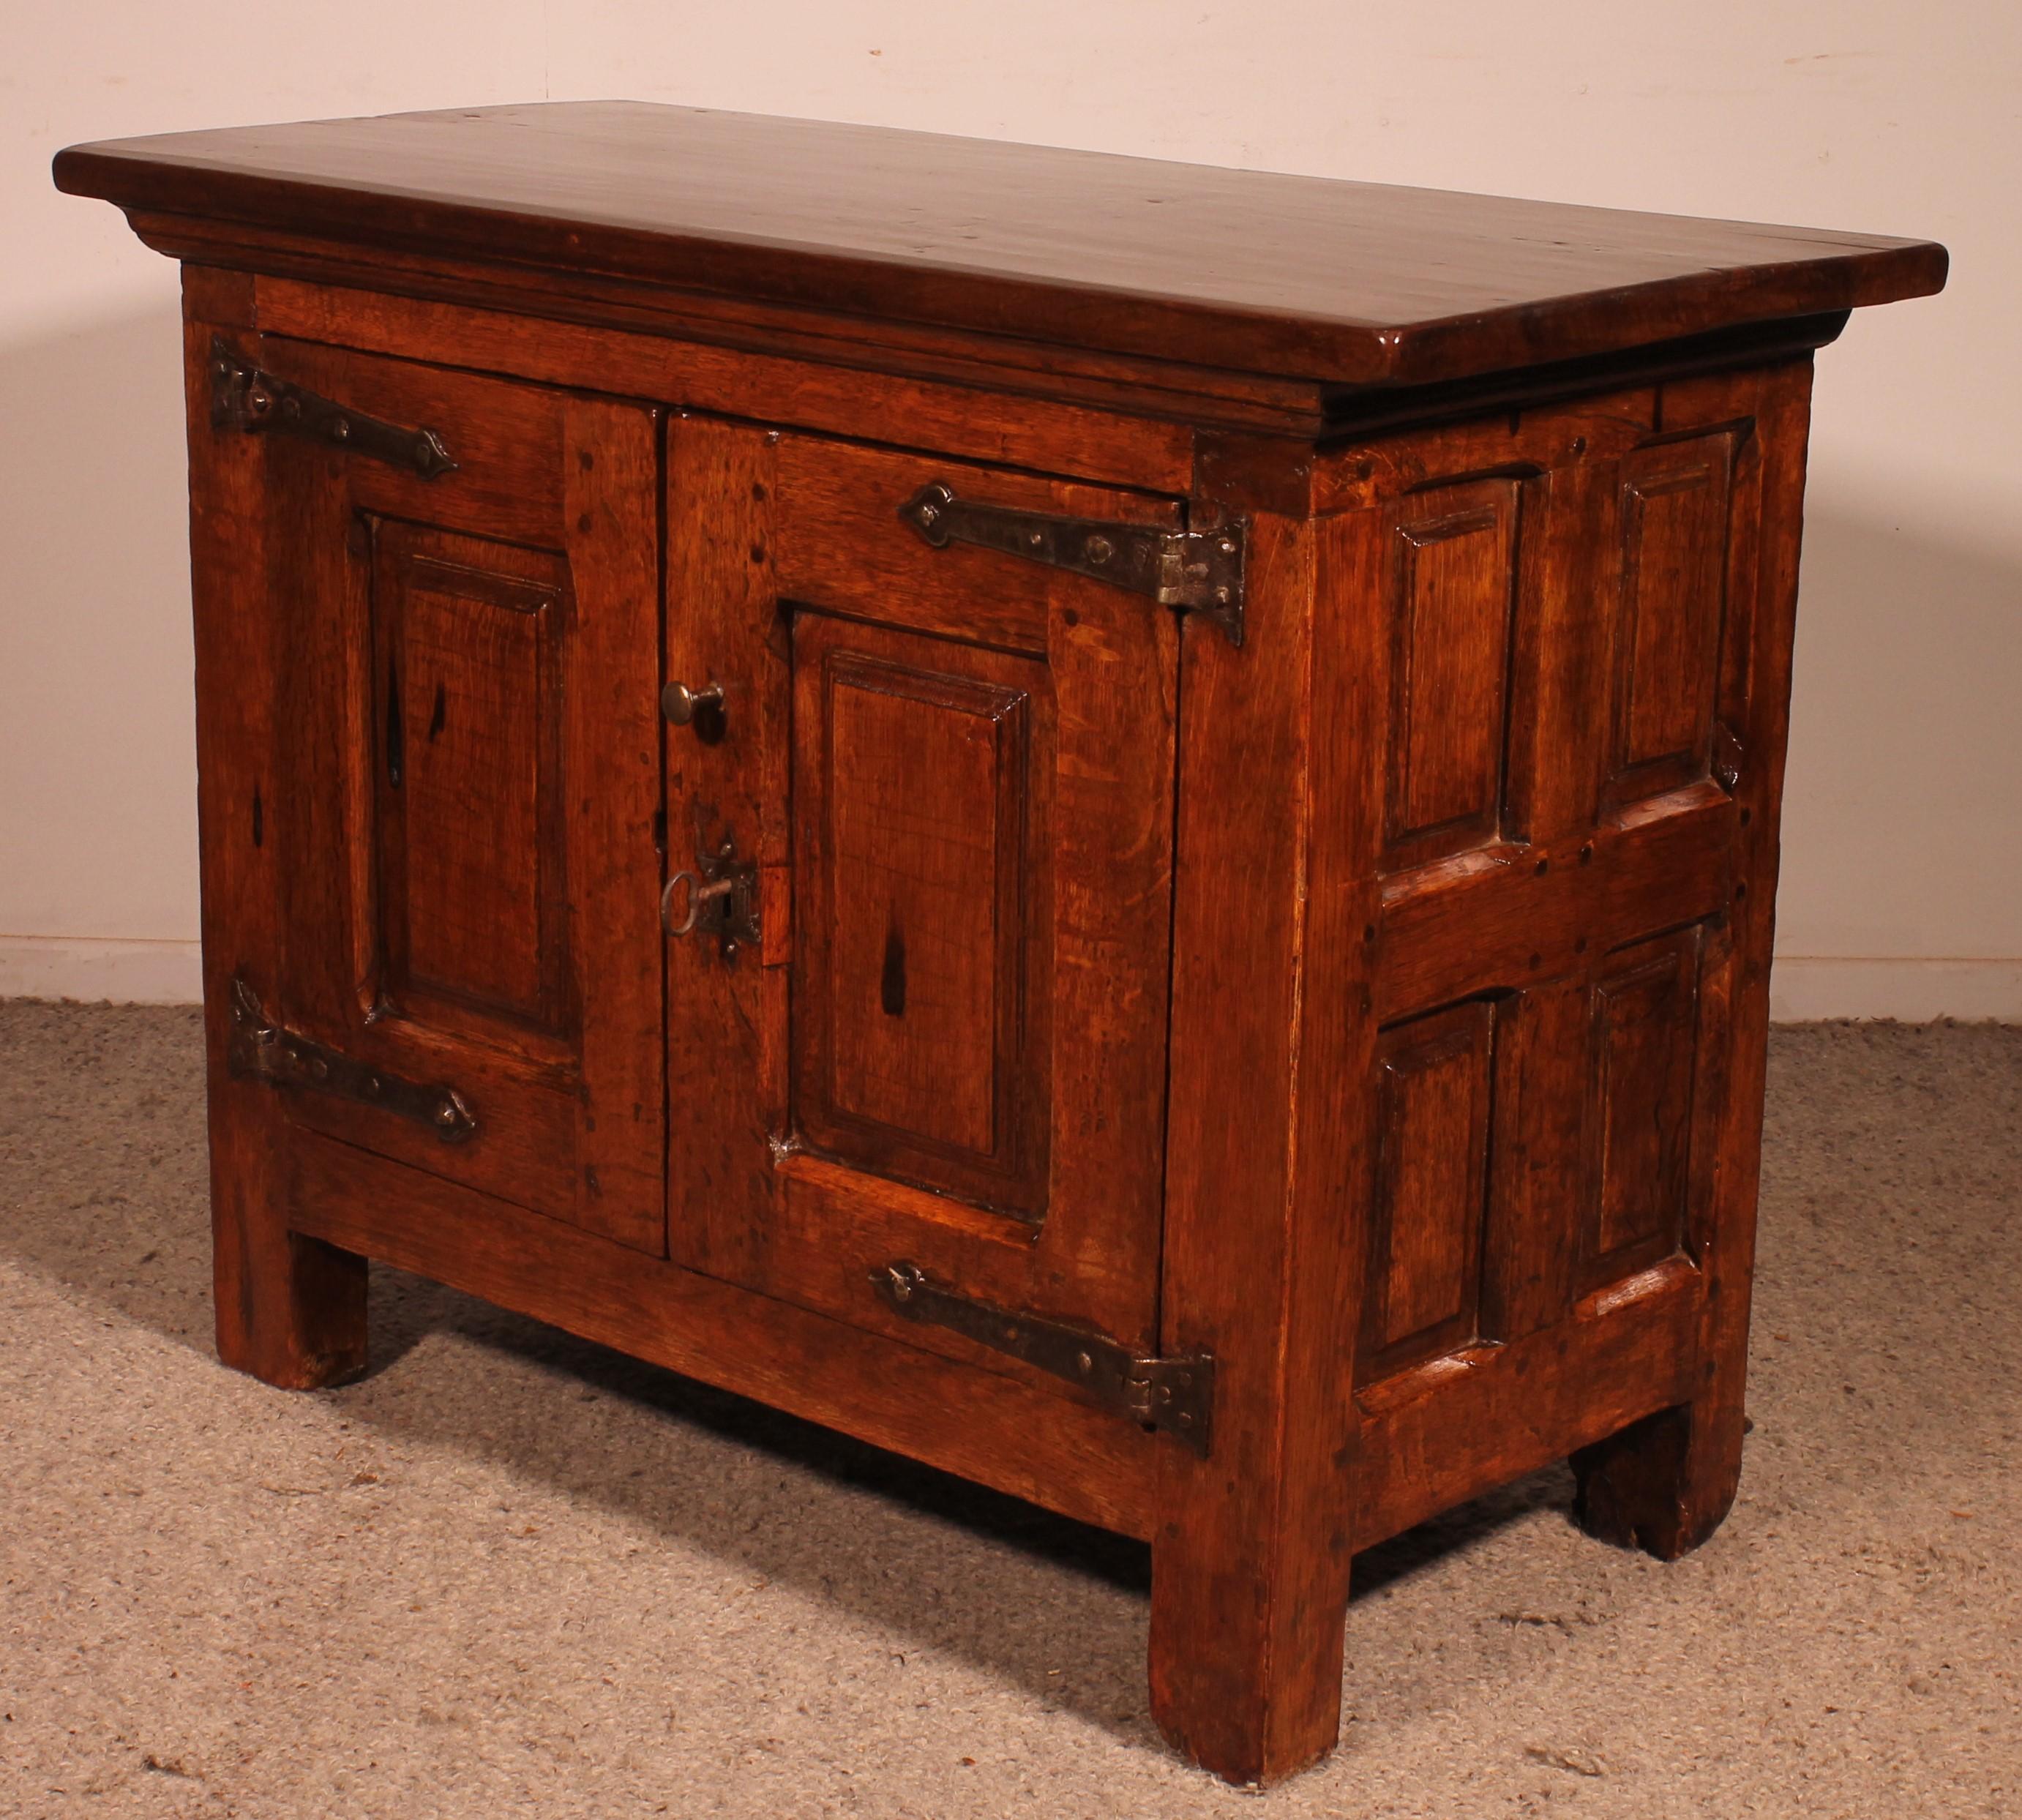 Louis XIII Buffet In Oak And Walnut From The 17th Century - Spain 2